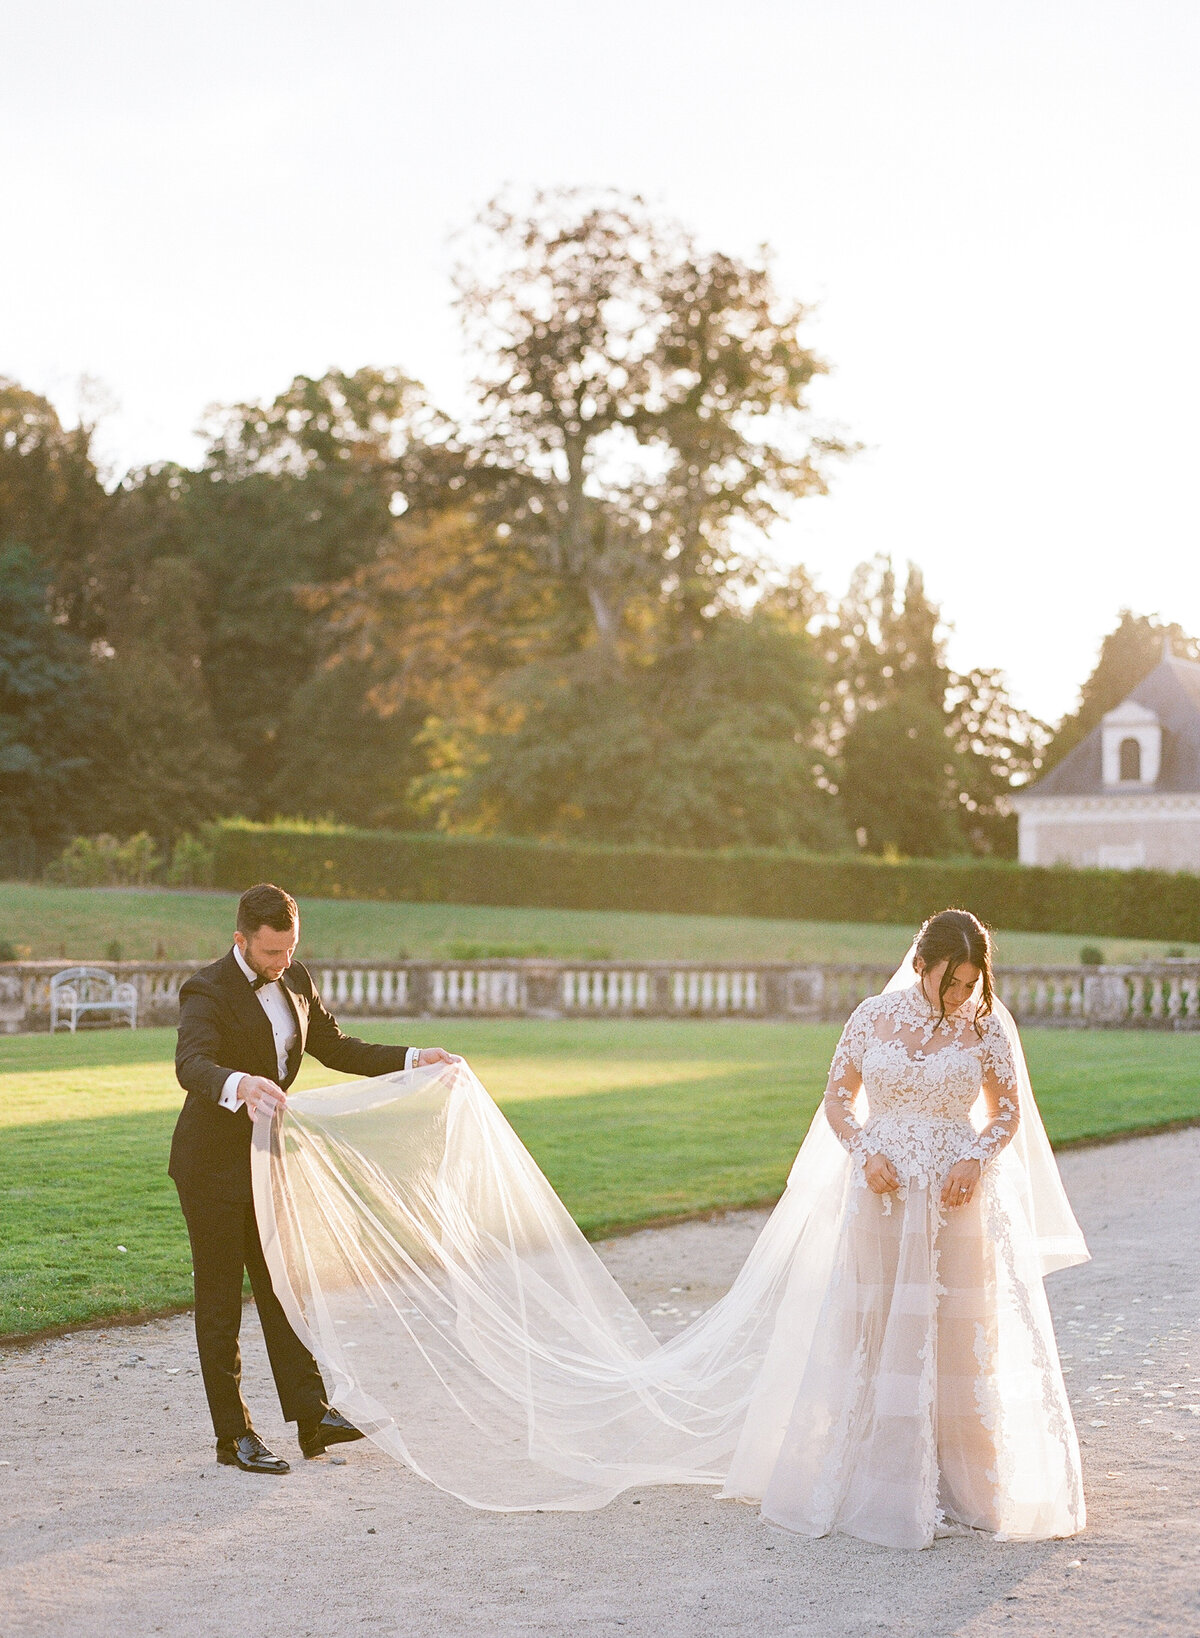 Jennifer Fox Weddings English speaking wedding planning & design agency in France crafting refined and bespoke weddings and celebrations Provence, Paris and destination Molly-Carr-Photography-Natalie-Ryan-Bride-Groom-45